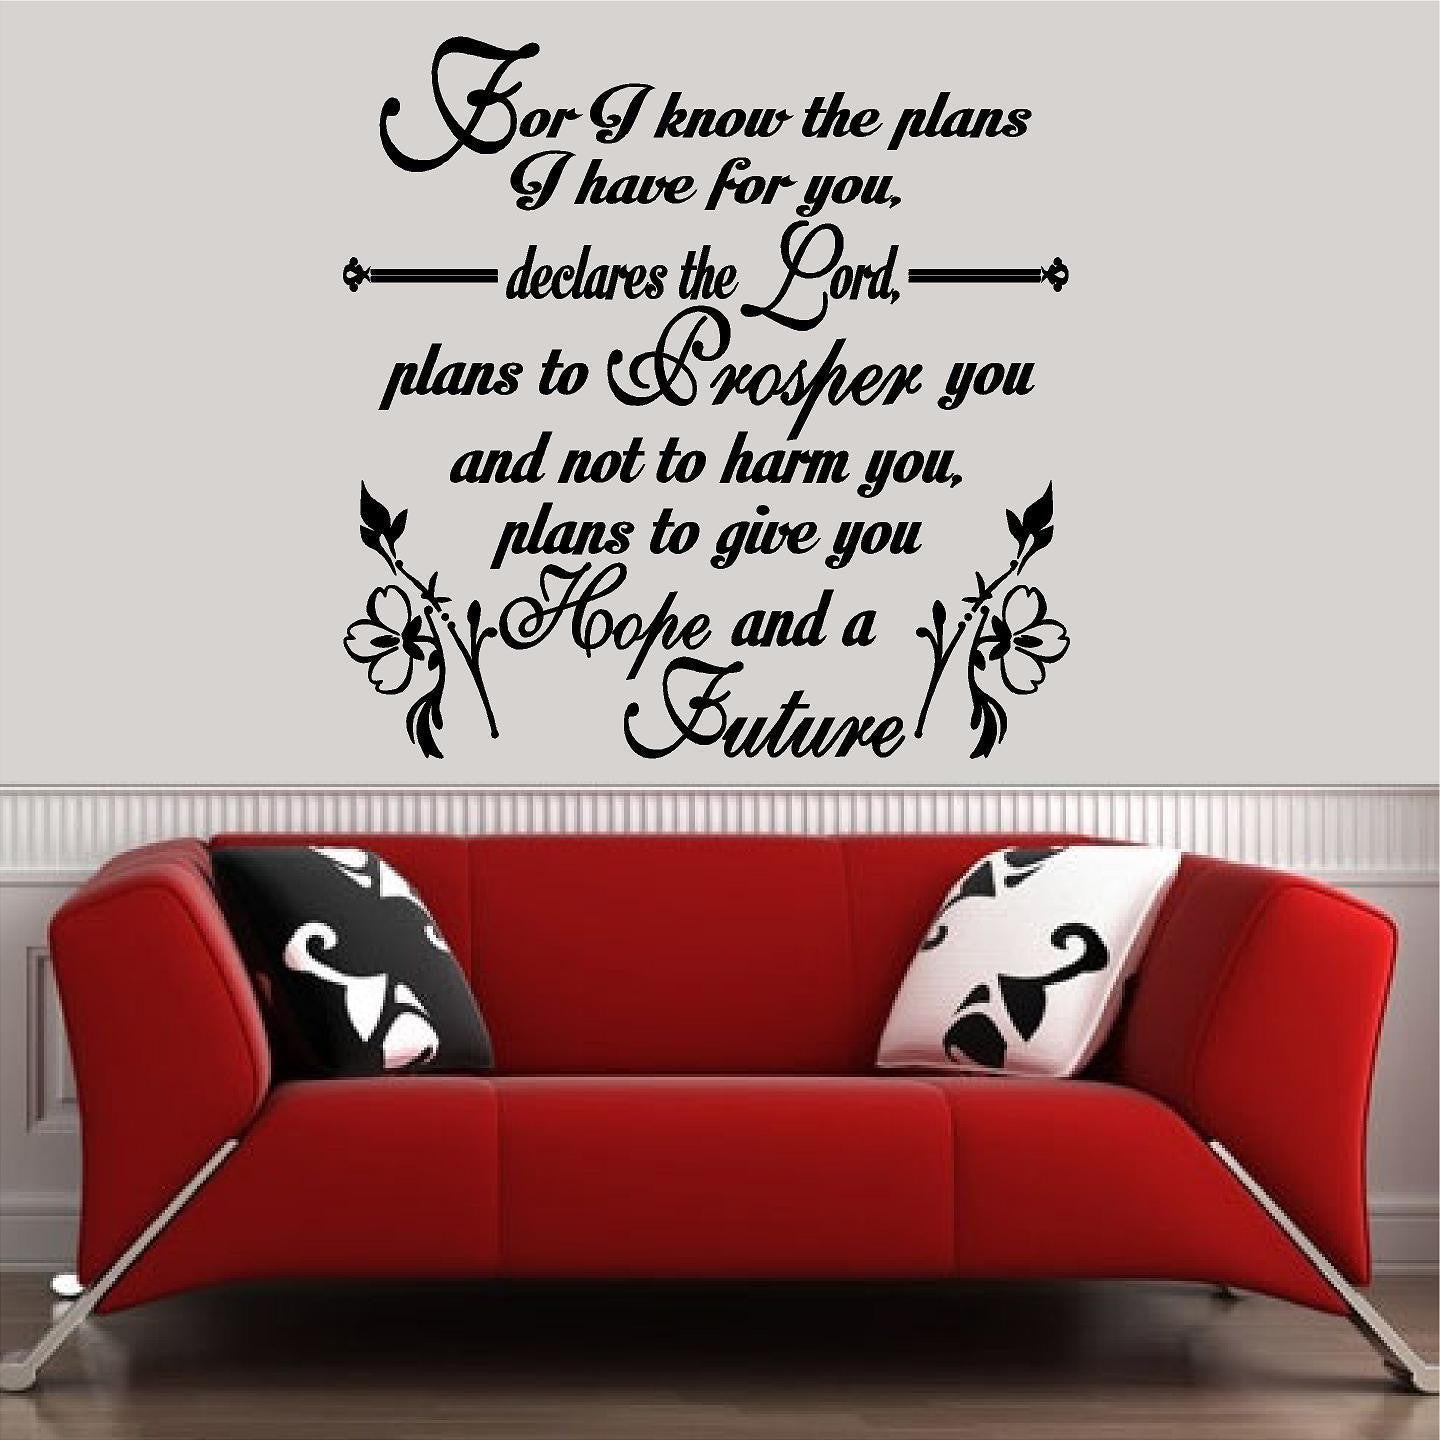 Stickers. Vinyl Wall Decal. Bible Scripture: Jeremiah 29:11